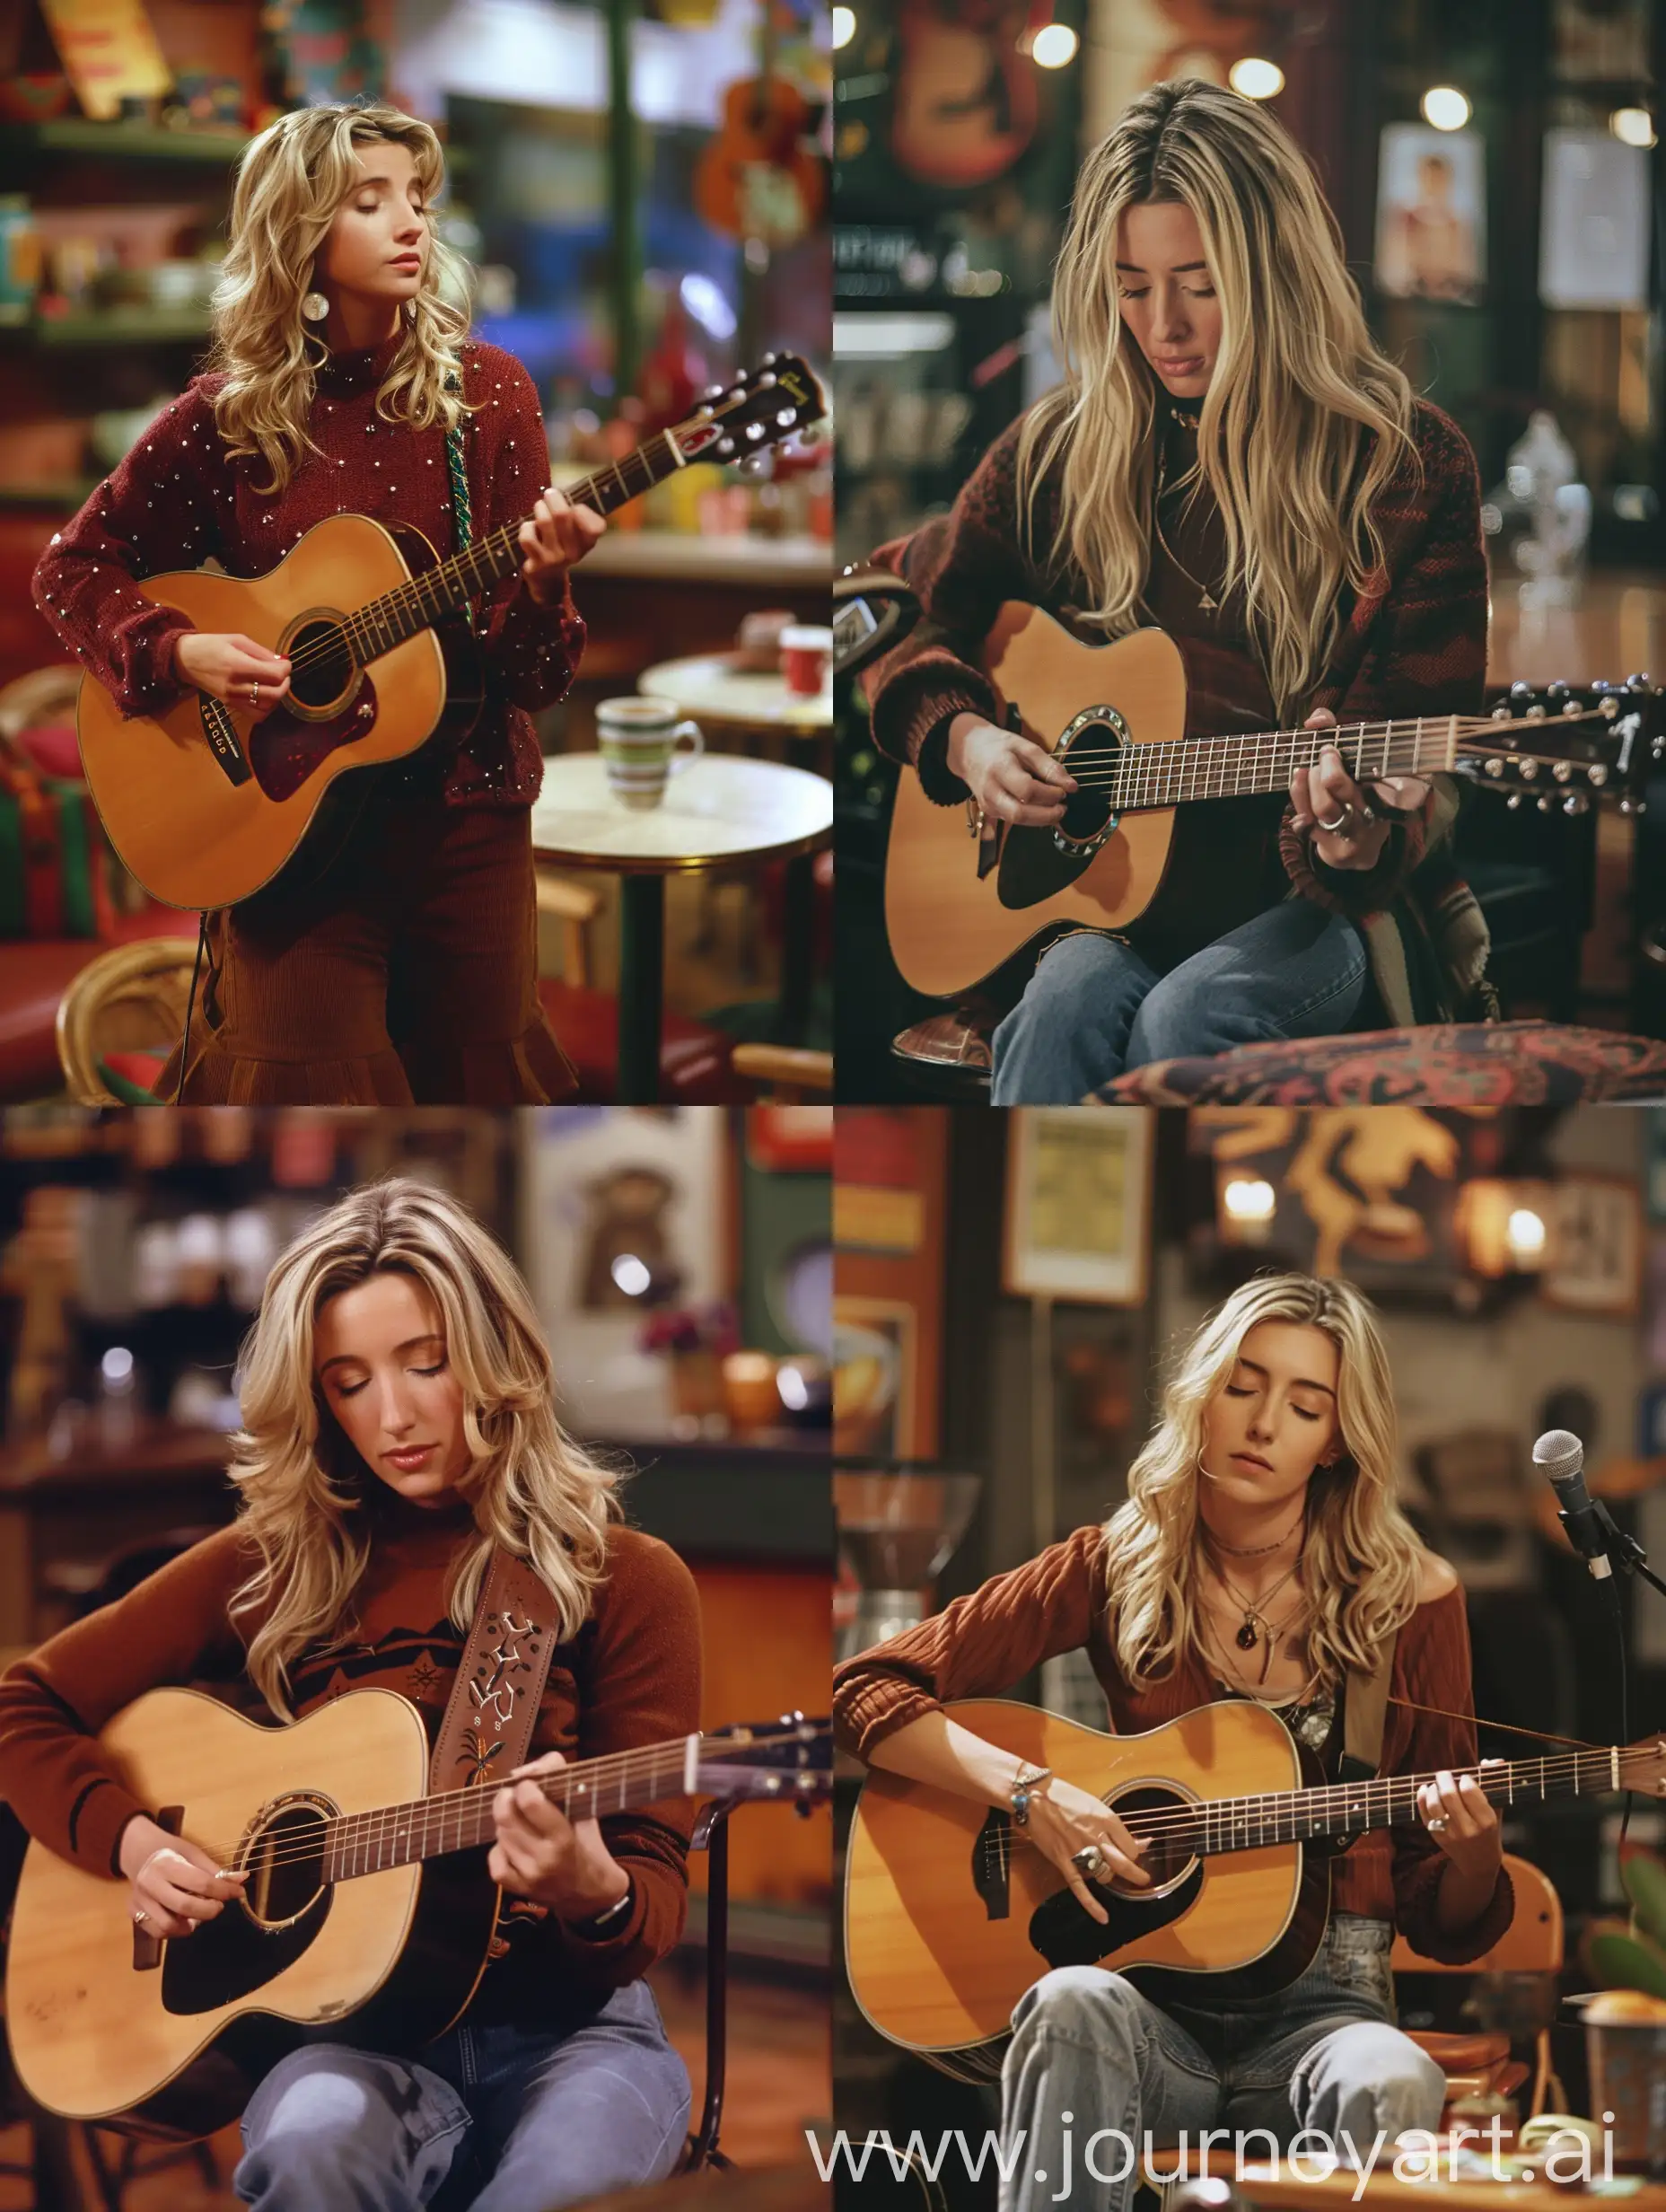 Blonde-Phoebe-Buffay-Playing-Guitar-at-Central-Perk-Coffee-Shop-in-Vibrant-1950s-Style